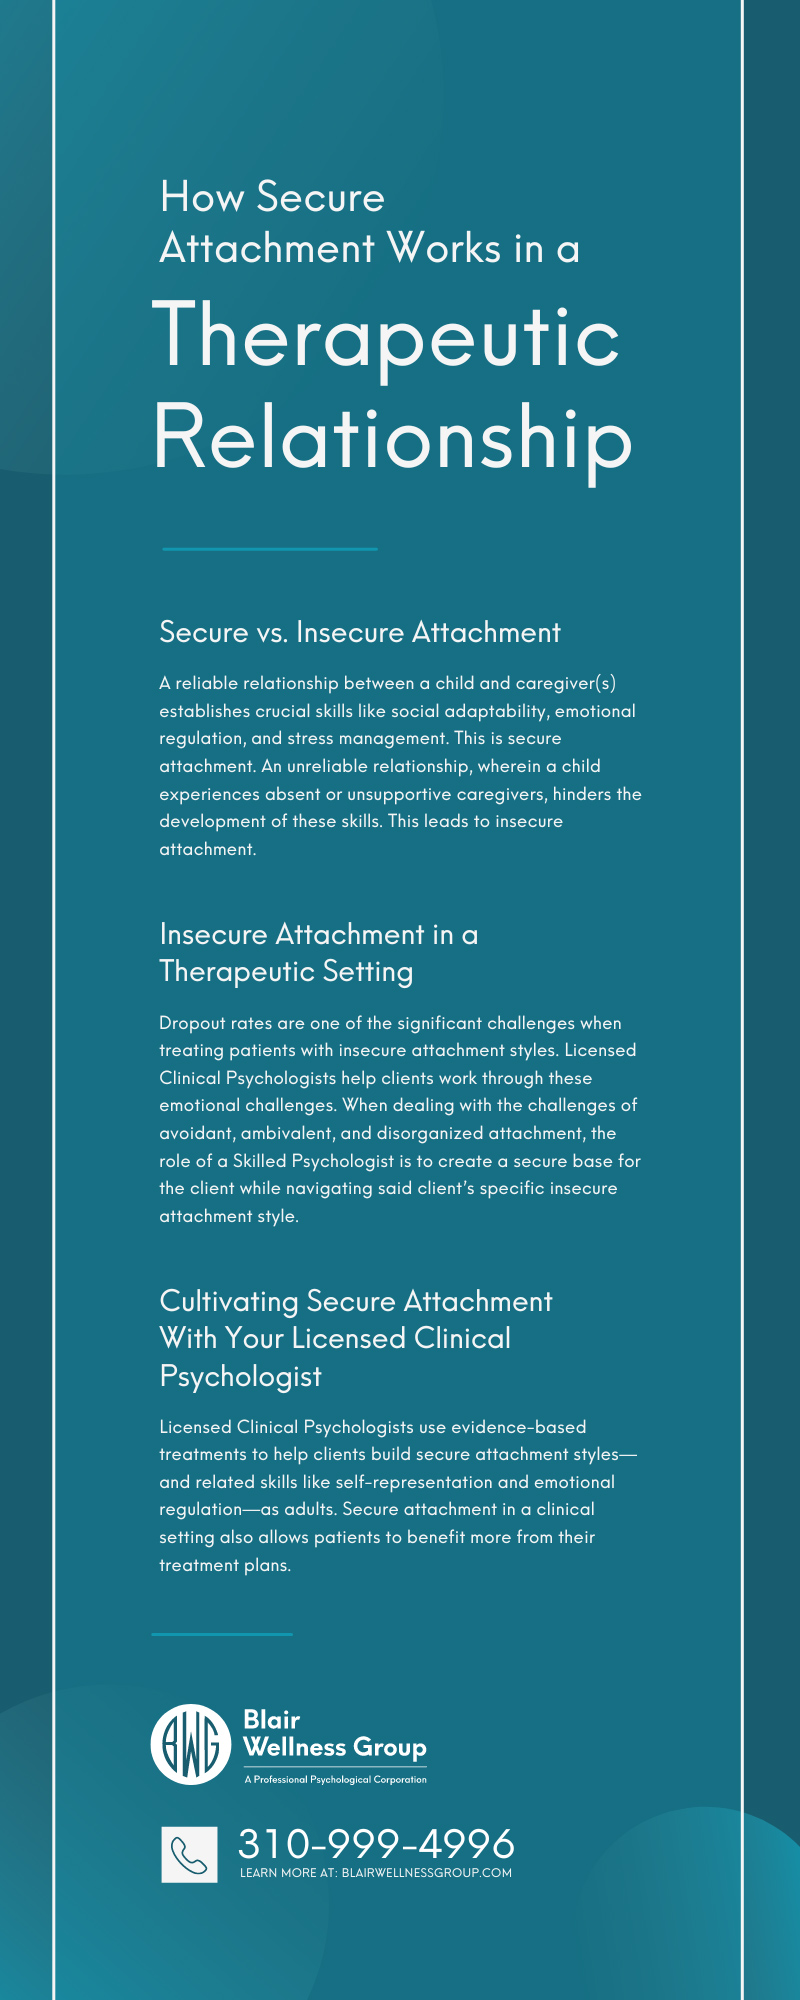 How Secure Attachment Works in a Therapeutic Relationship